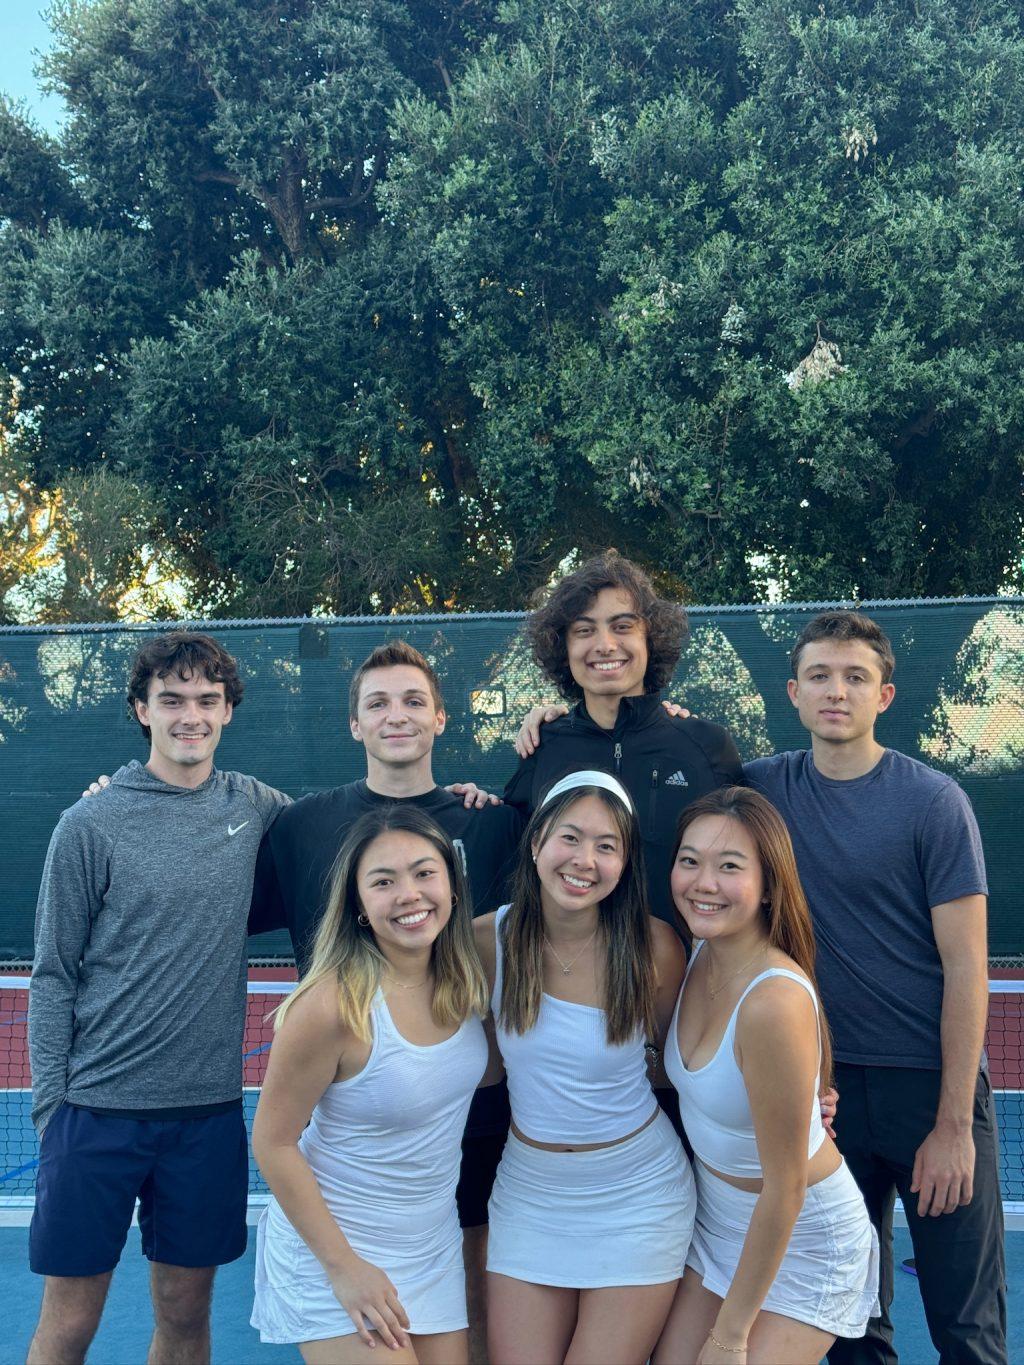 Pepp Pickle's executive board, (from left to right, top to bottom) Anthony Massaro, Joseph Bowman, Lucas Lorimer, Jack Bracci, Emily Luong, Katelyn Hsu, and Jean Chae, poses for a picture at Lower Alumni Courts on Feb. 9. They are in charge of ensuring fun for pickleball players, according to their Instagram. Photo courtesy of Katelyn Hsu